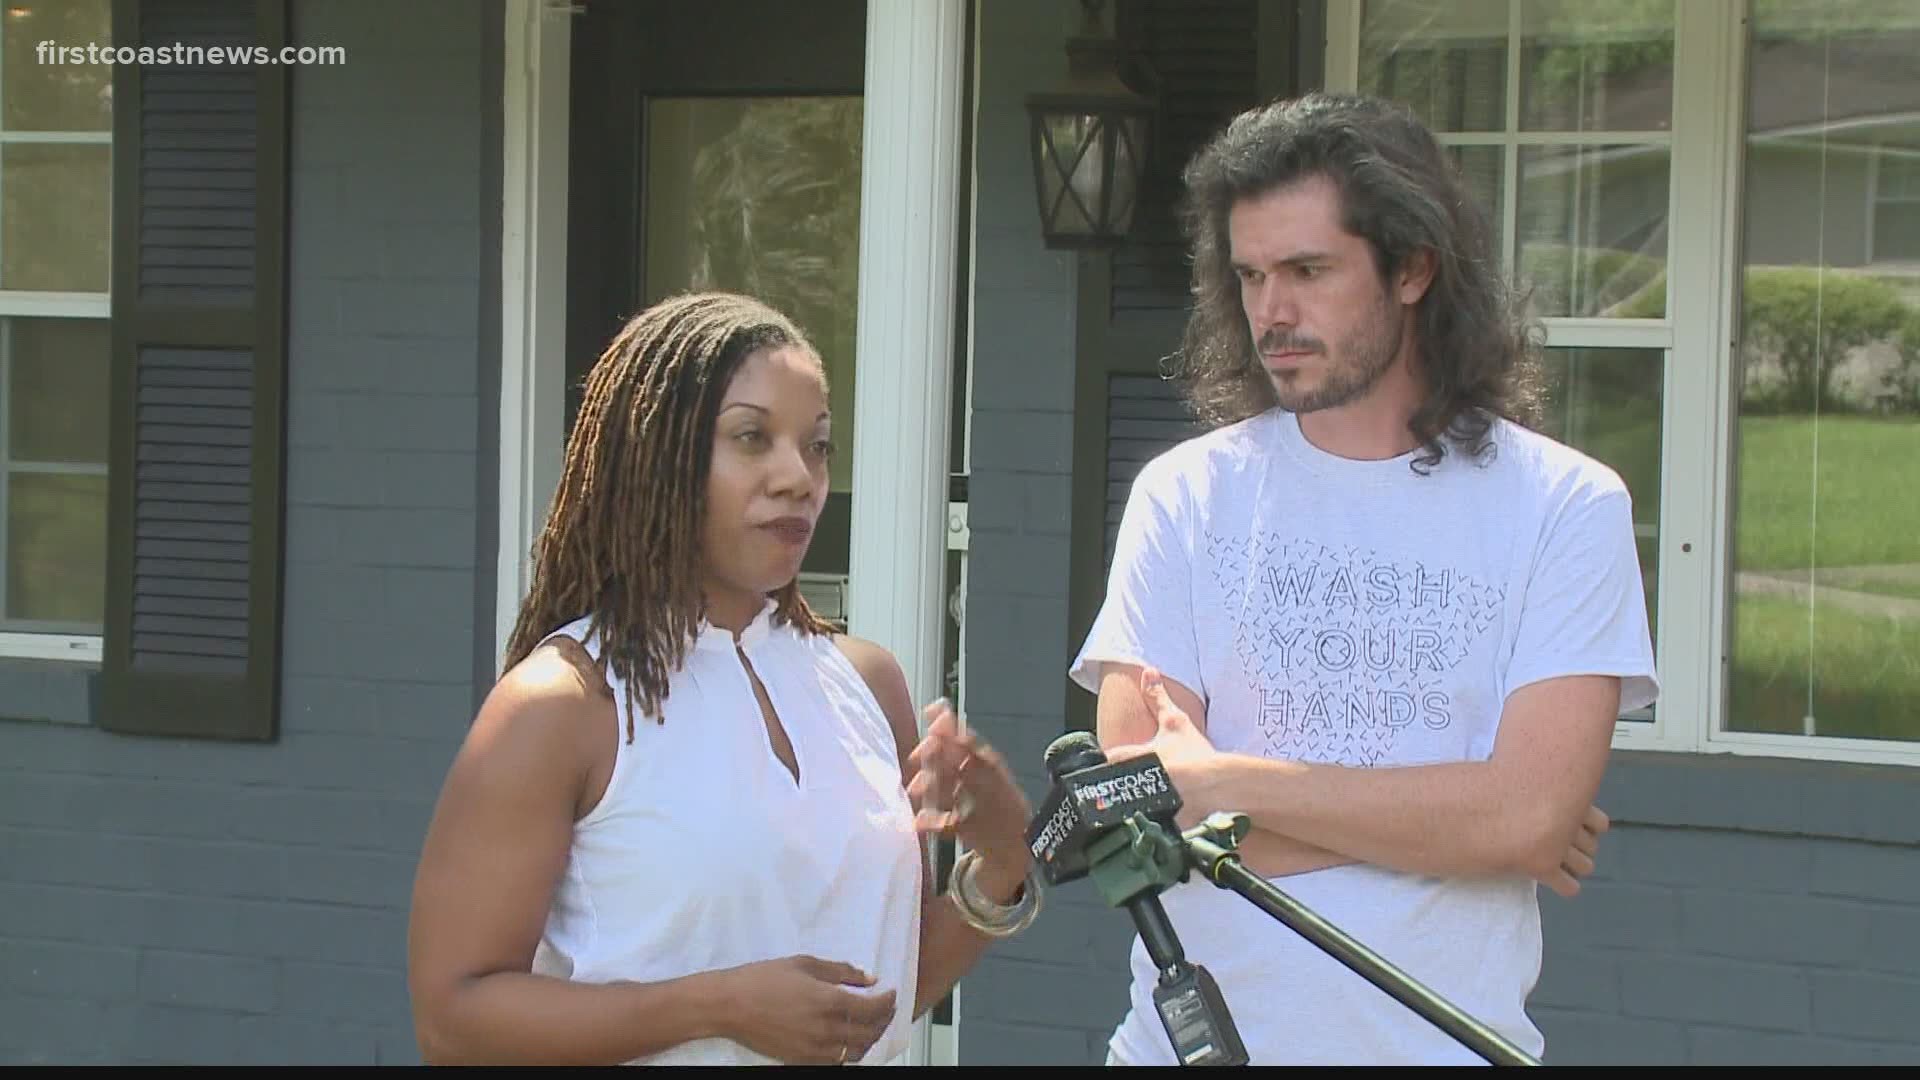 Ortega family says their home's value jumped 40 percent after they removed Black art, Black authors and Black residents from the home.